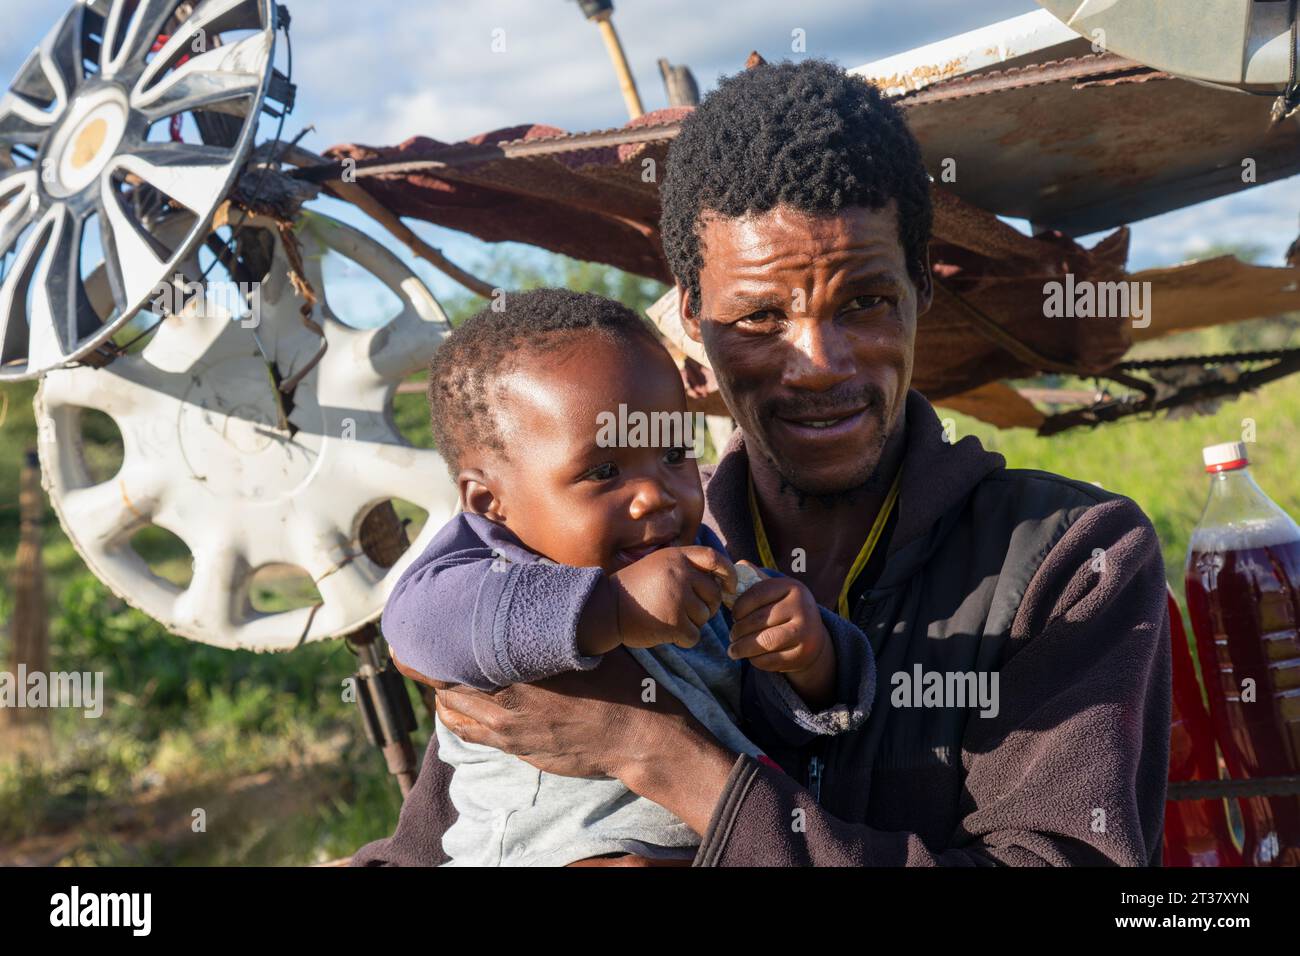 african village ,street vendor selling petrol gas in bottles by the side of the road, he is holding his baby. Stock Photo